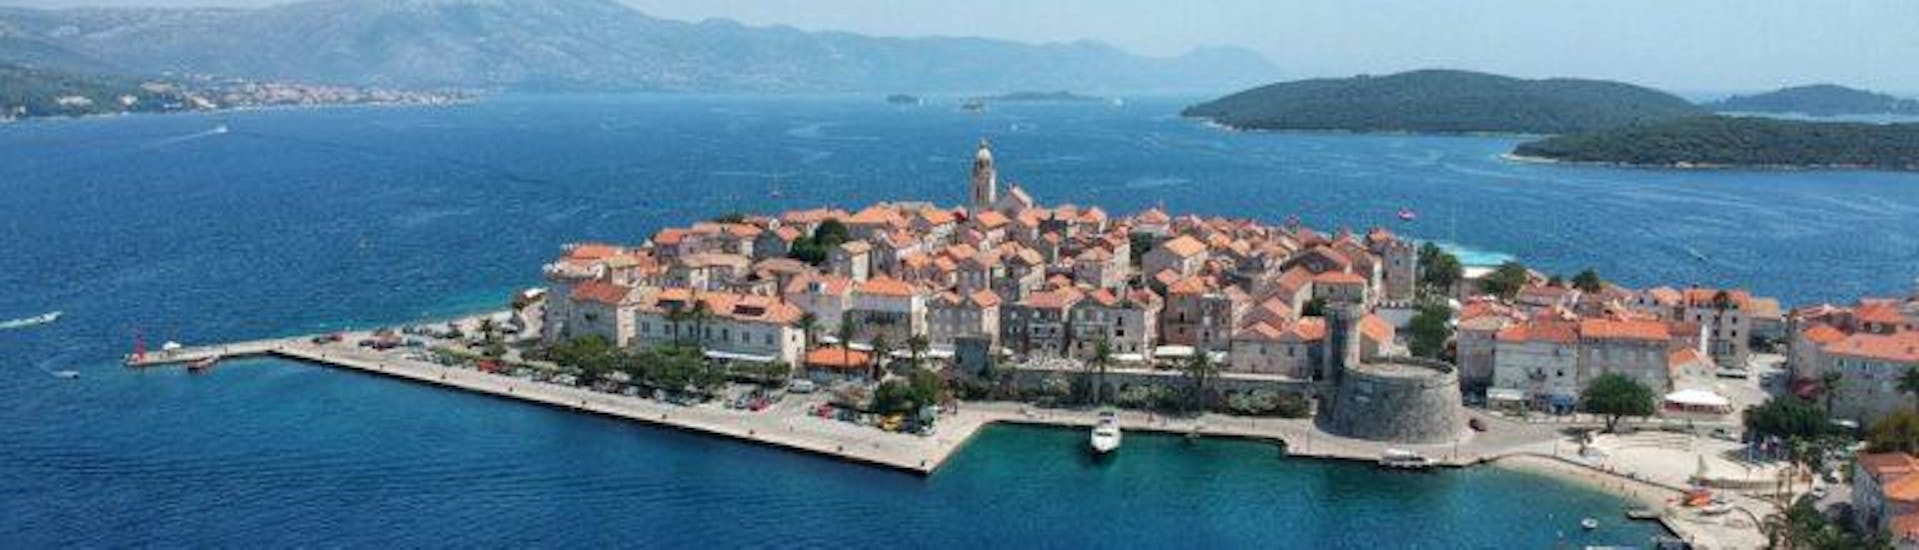 A view of the town Korcula where Fish & Fun Korcula offers its tours.